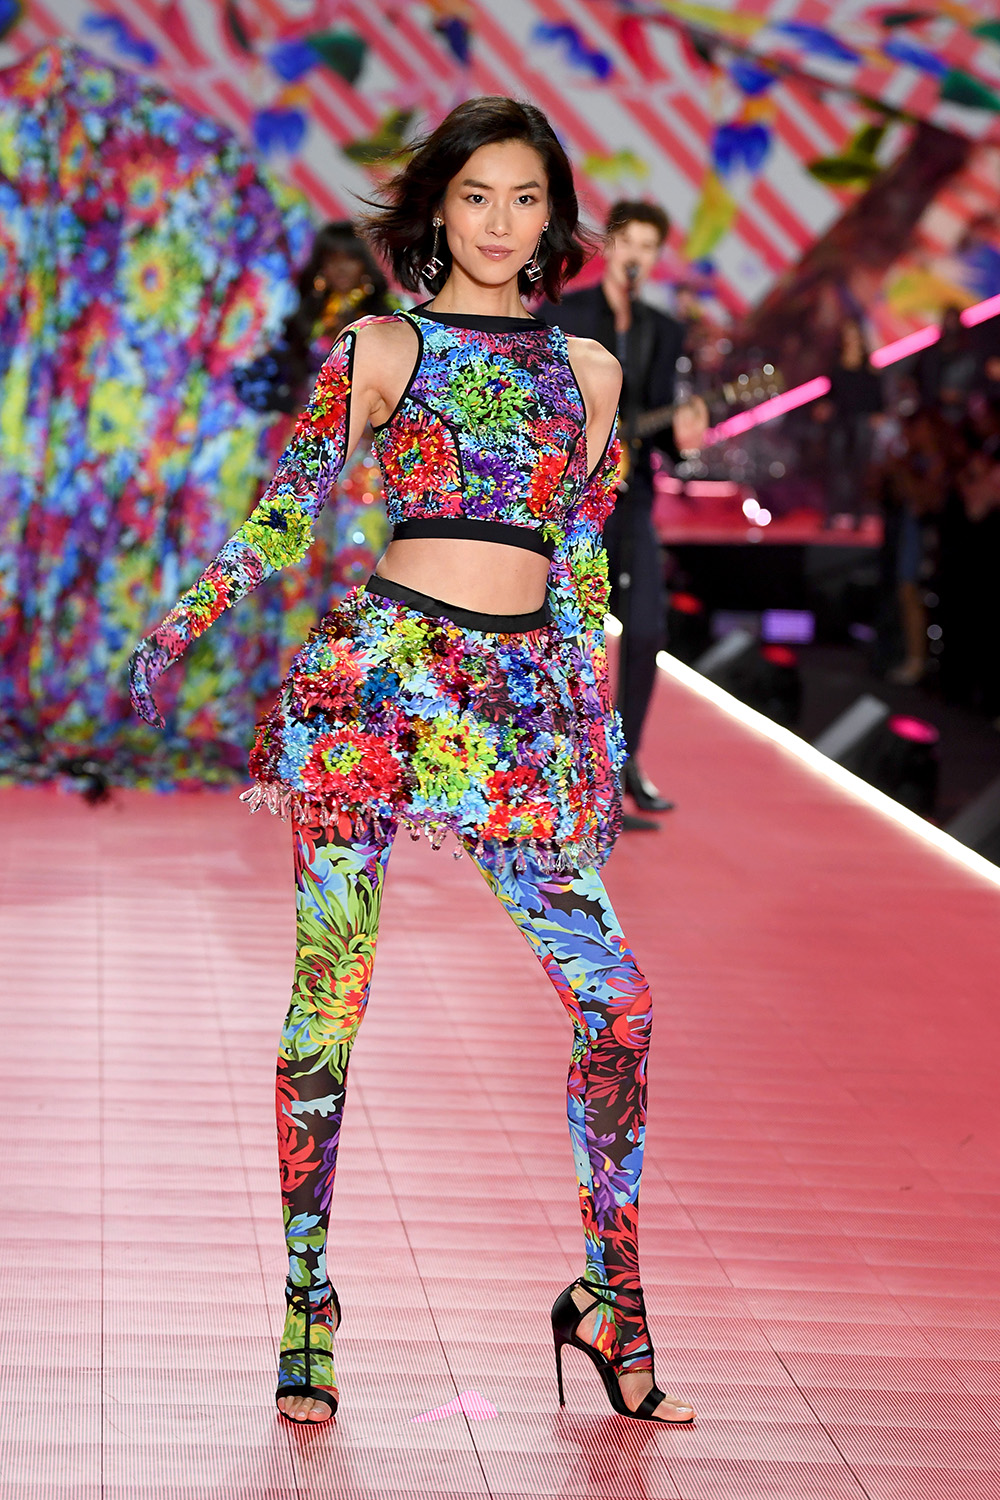 NEW YORK, NY - NOVEMBER 08: Liu Wen walks the runway during the 2018 Victoria's Secret Fashion Show at Pier 94 on November 8, 2018 in New York City. (Photo by Dimitrios Kambouris/Getty Images for Victoria's Secret)